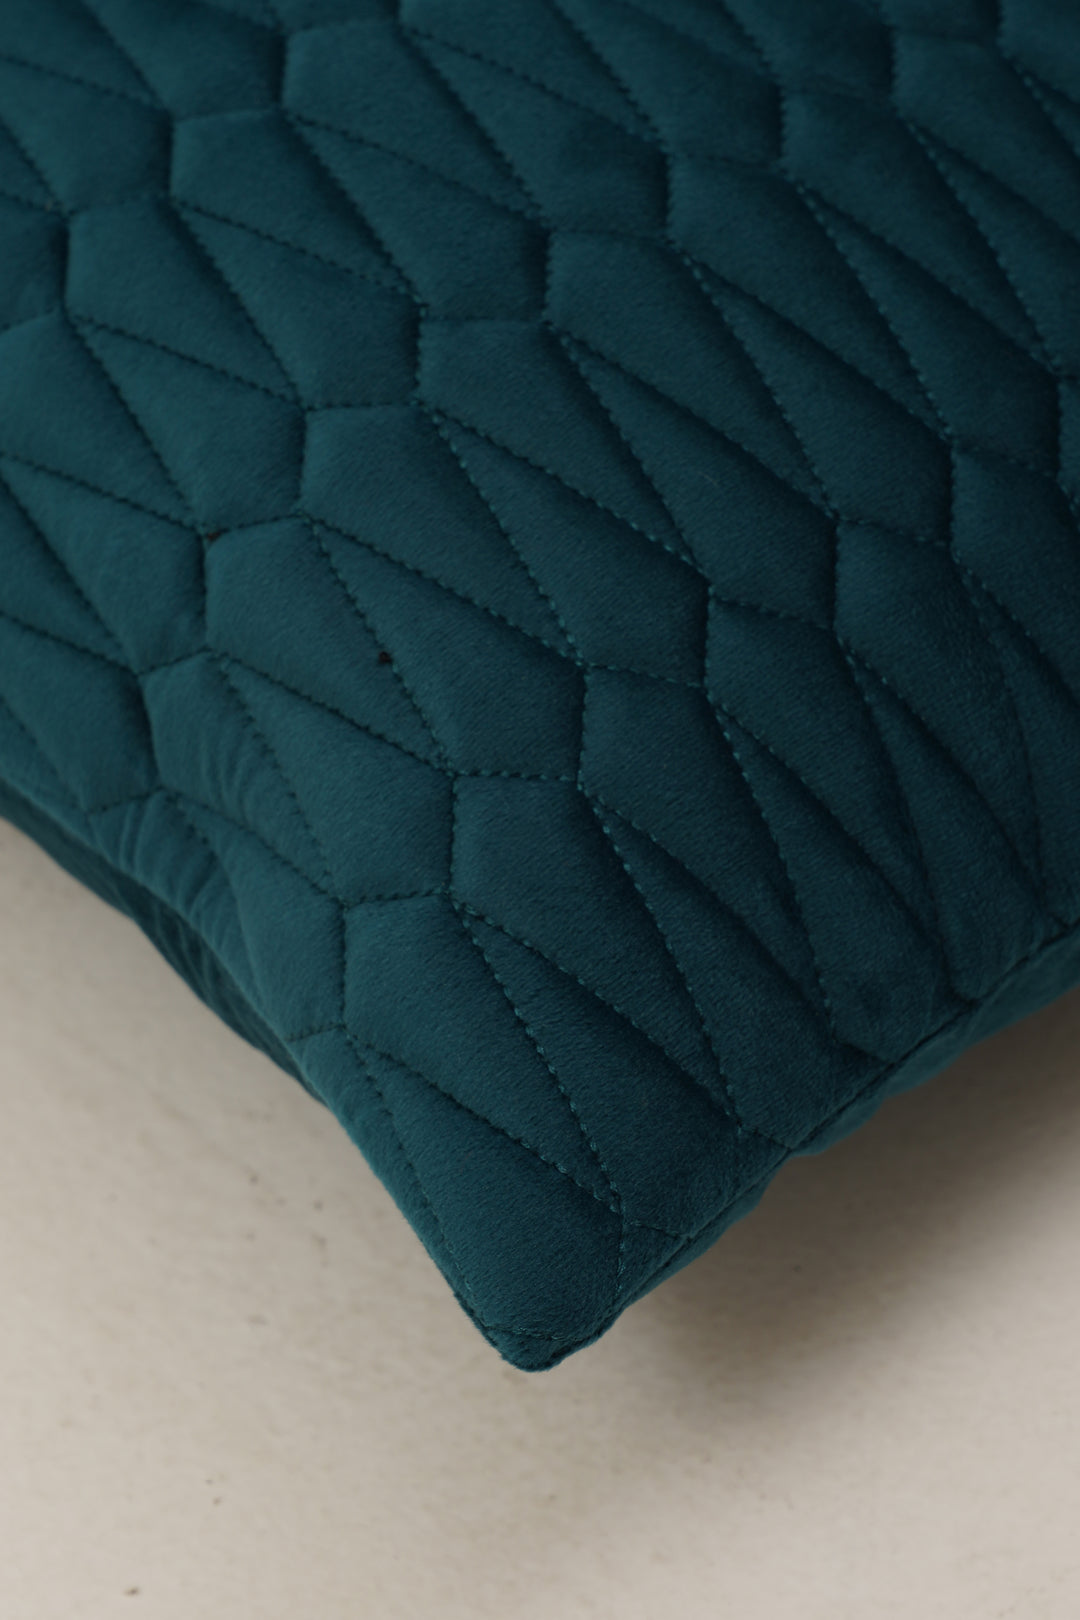 Sapphire Cushion Cover 16 x 16. Set of 2 (teal)